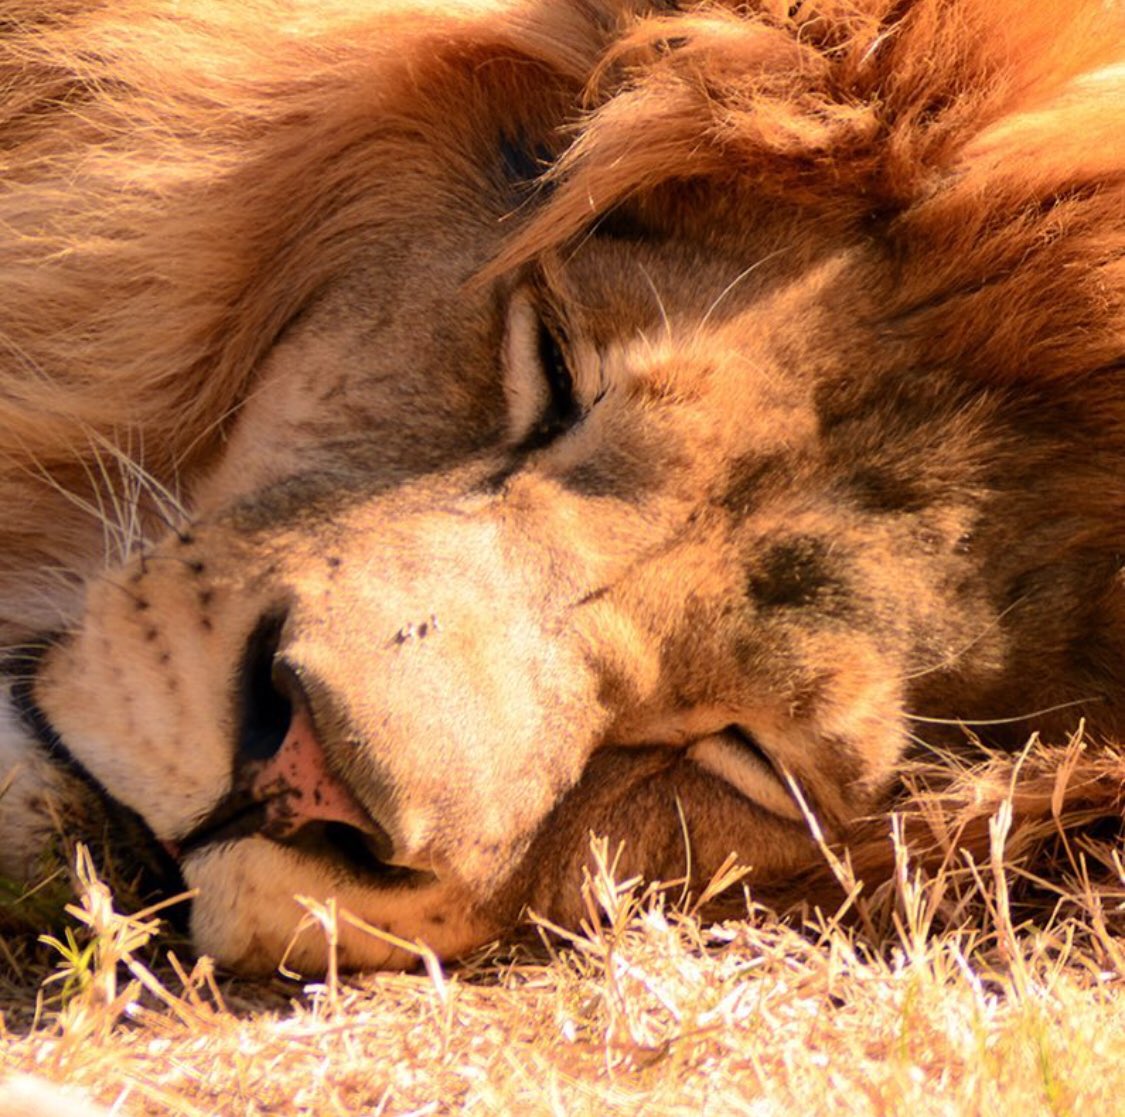 One of those days... where you just want to keep hitting snooze. 💤 💤 
(📷credit: Charles Ralston)
#lion #snooze #aftertheholidays